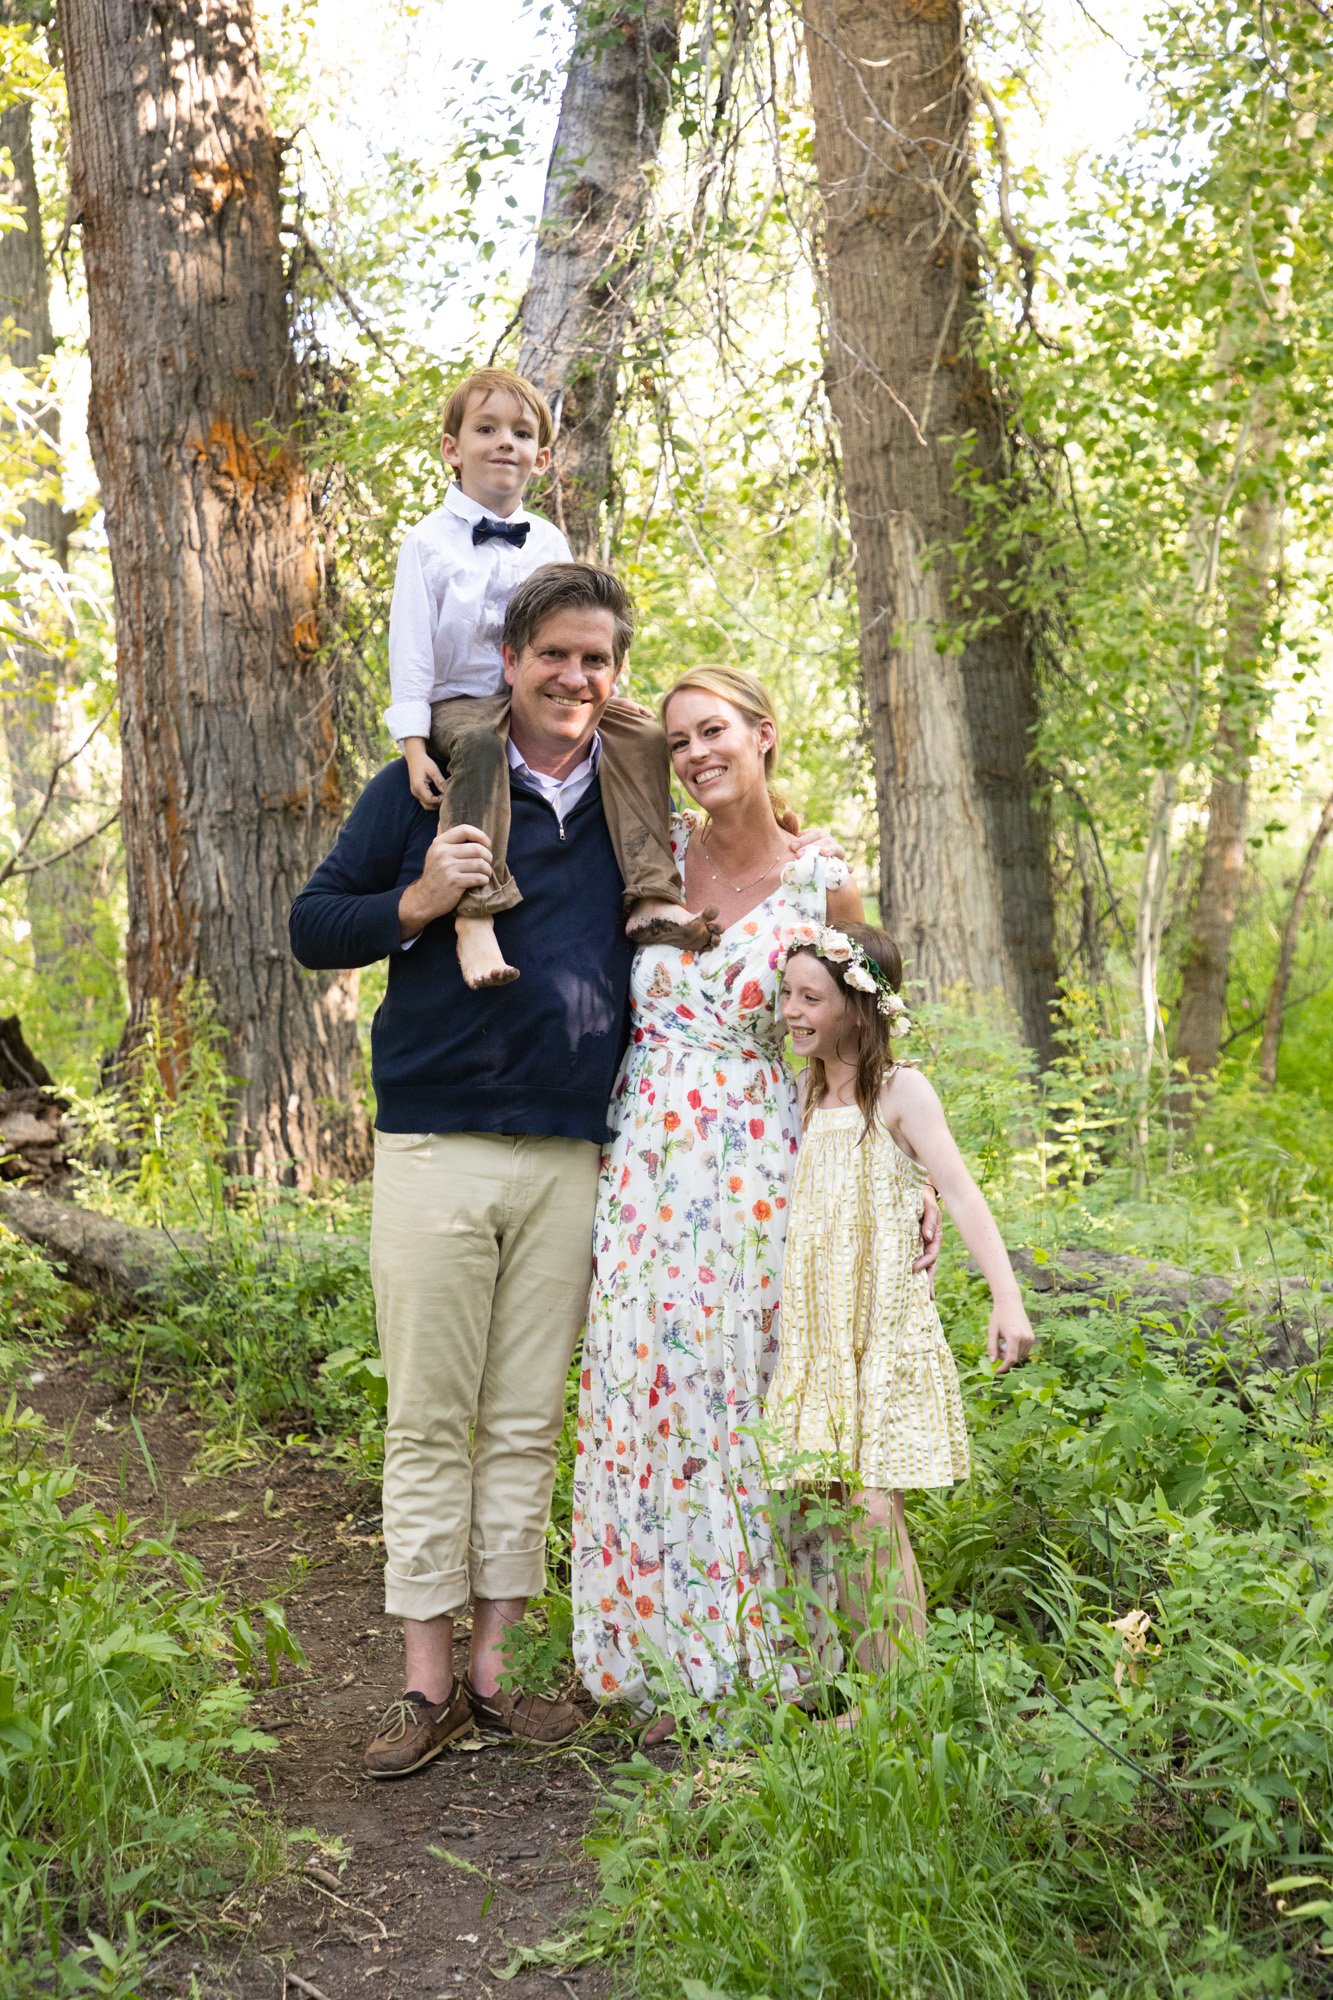 Lewis family photos in Sun Valley, Idaho with photography by Tessa Sheehan